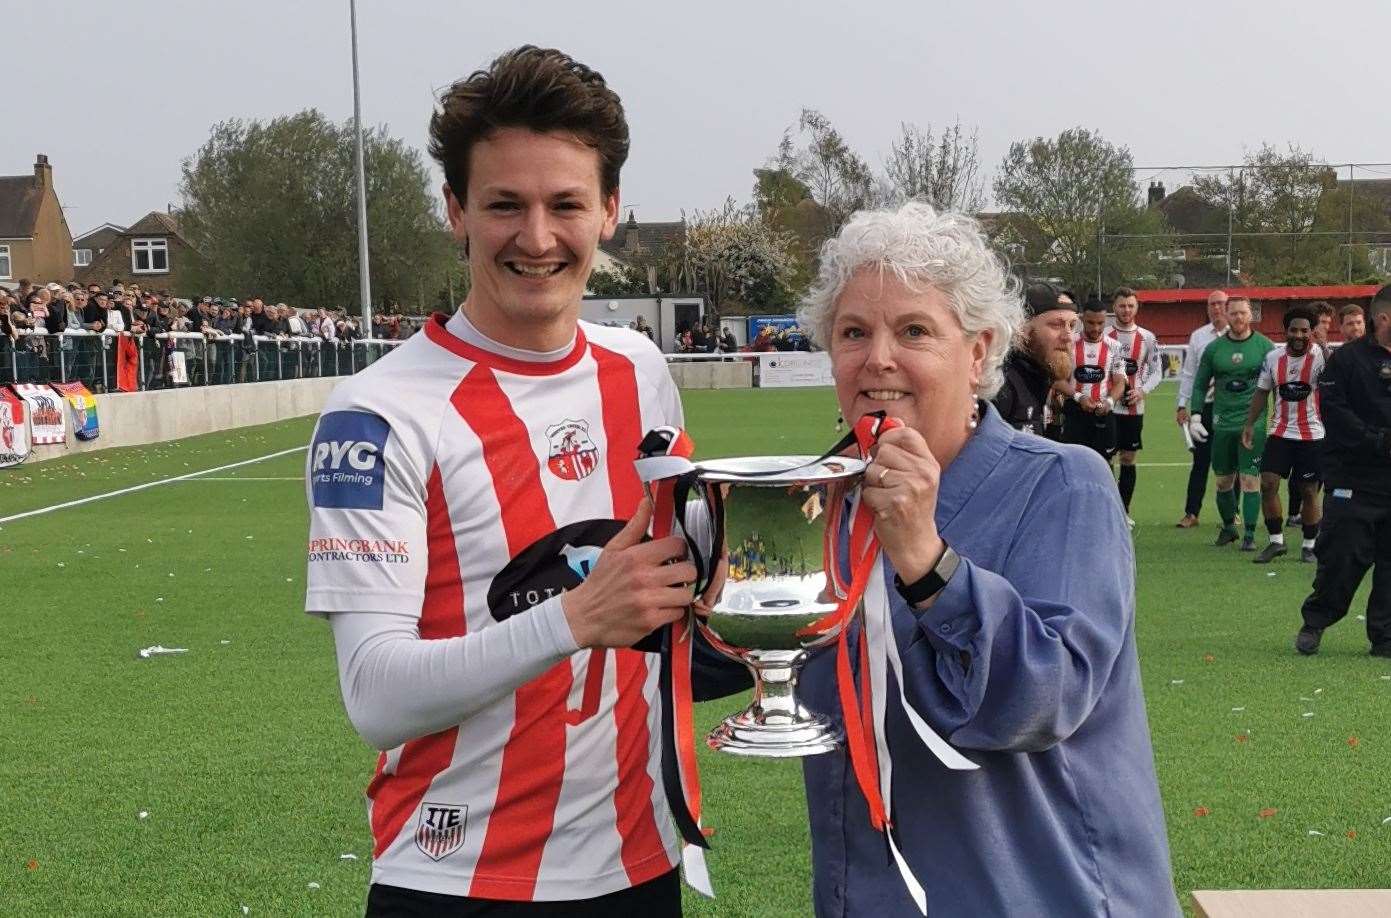 Southern Counties East chair Denise Richmond presents Sheppey captain Billy Bennett with the Southern Counties East League Premier Division trophy.